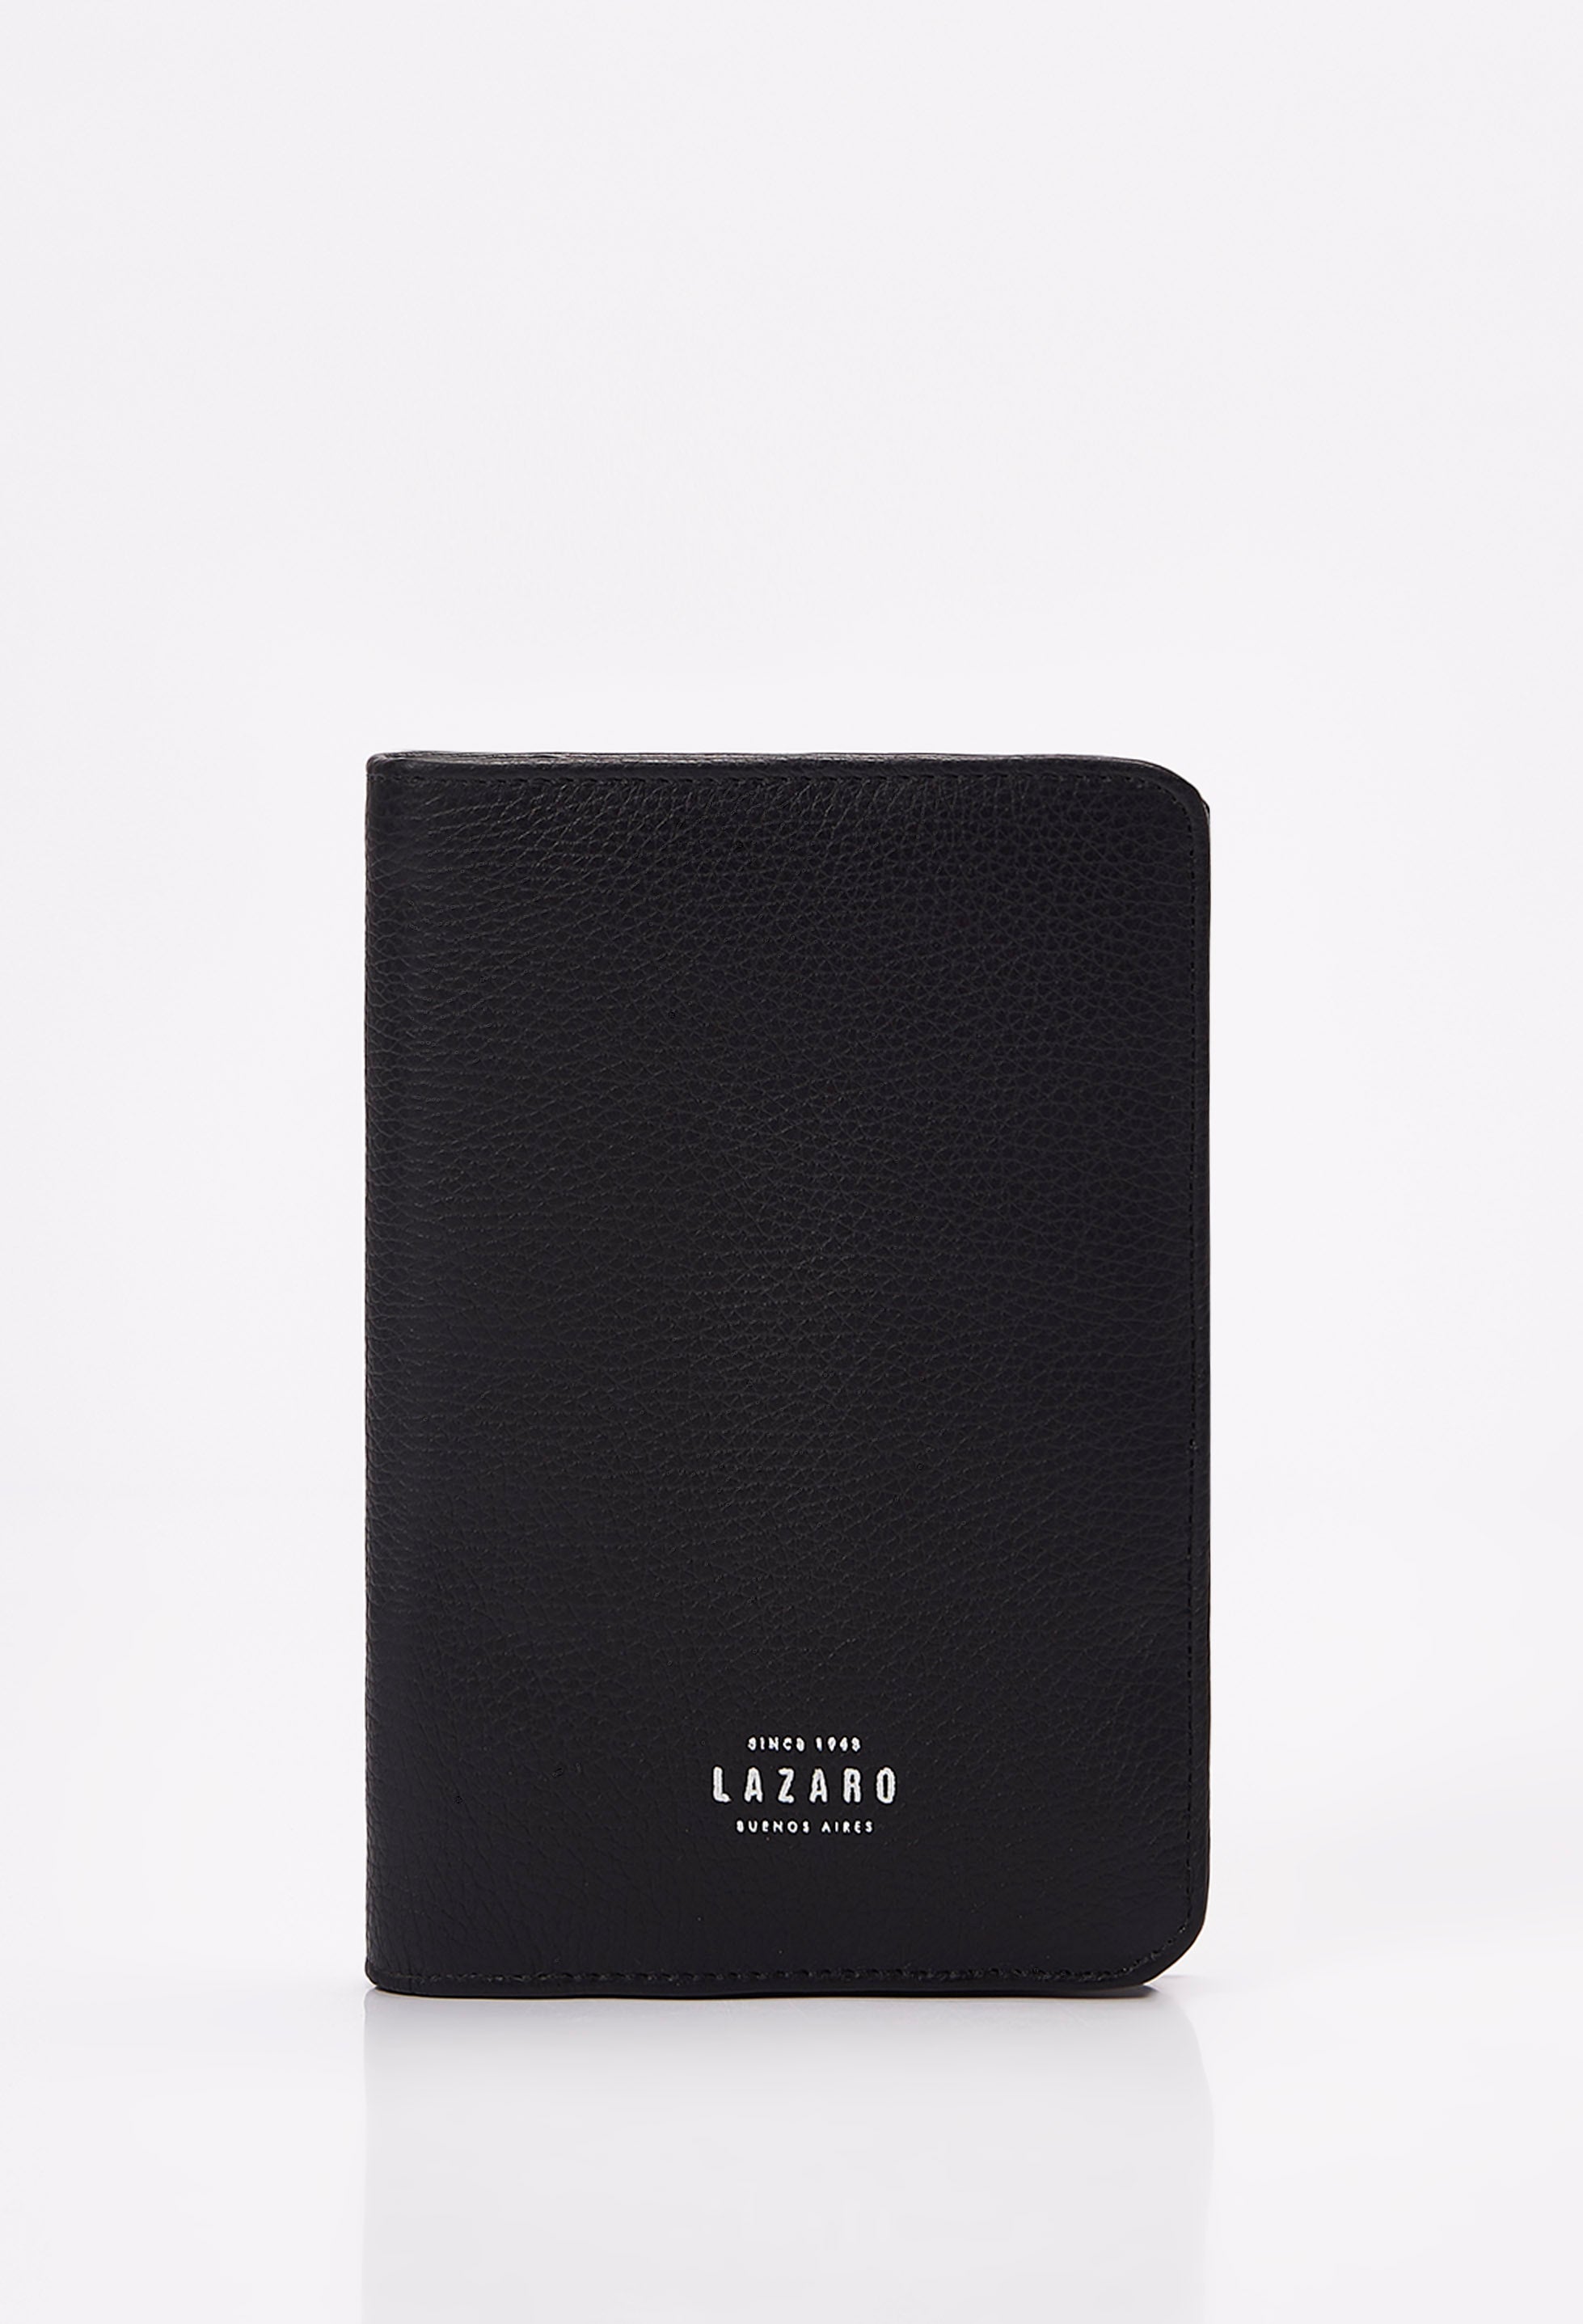 Front of a Black Leather Passport Holder with Lazaro logo.